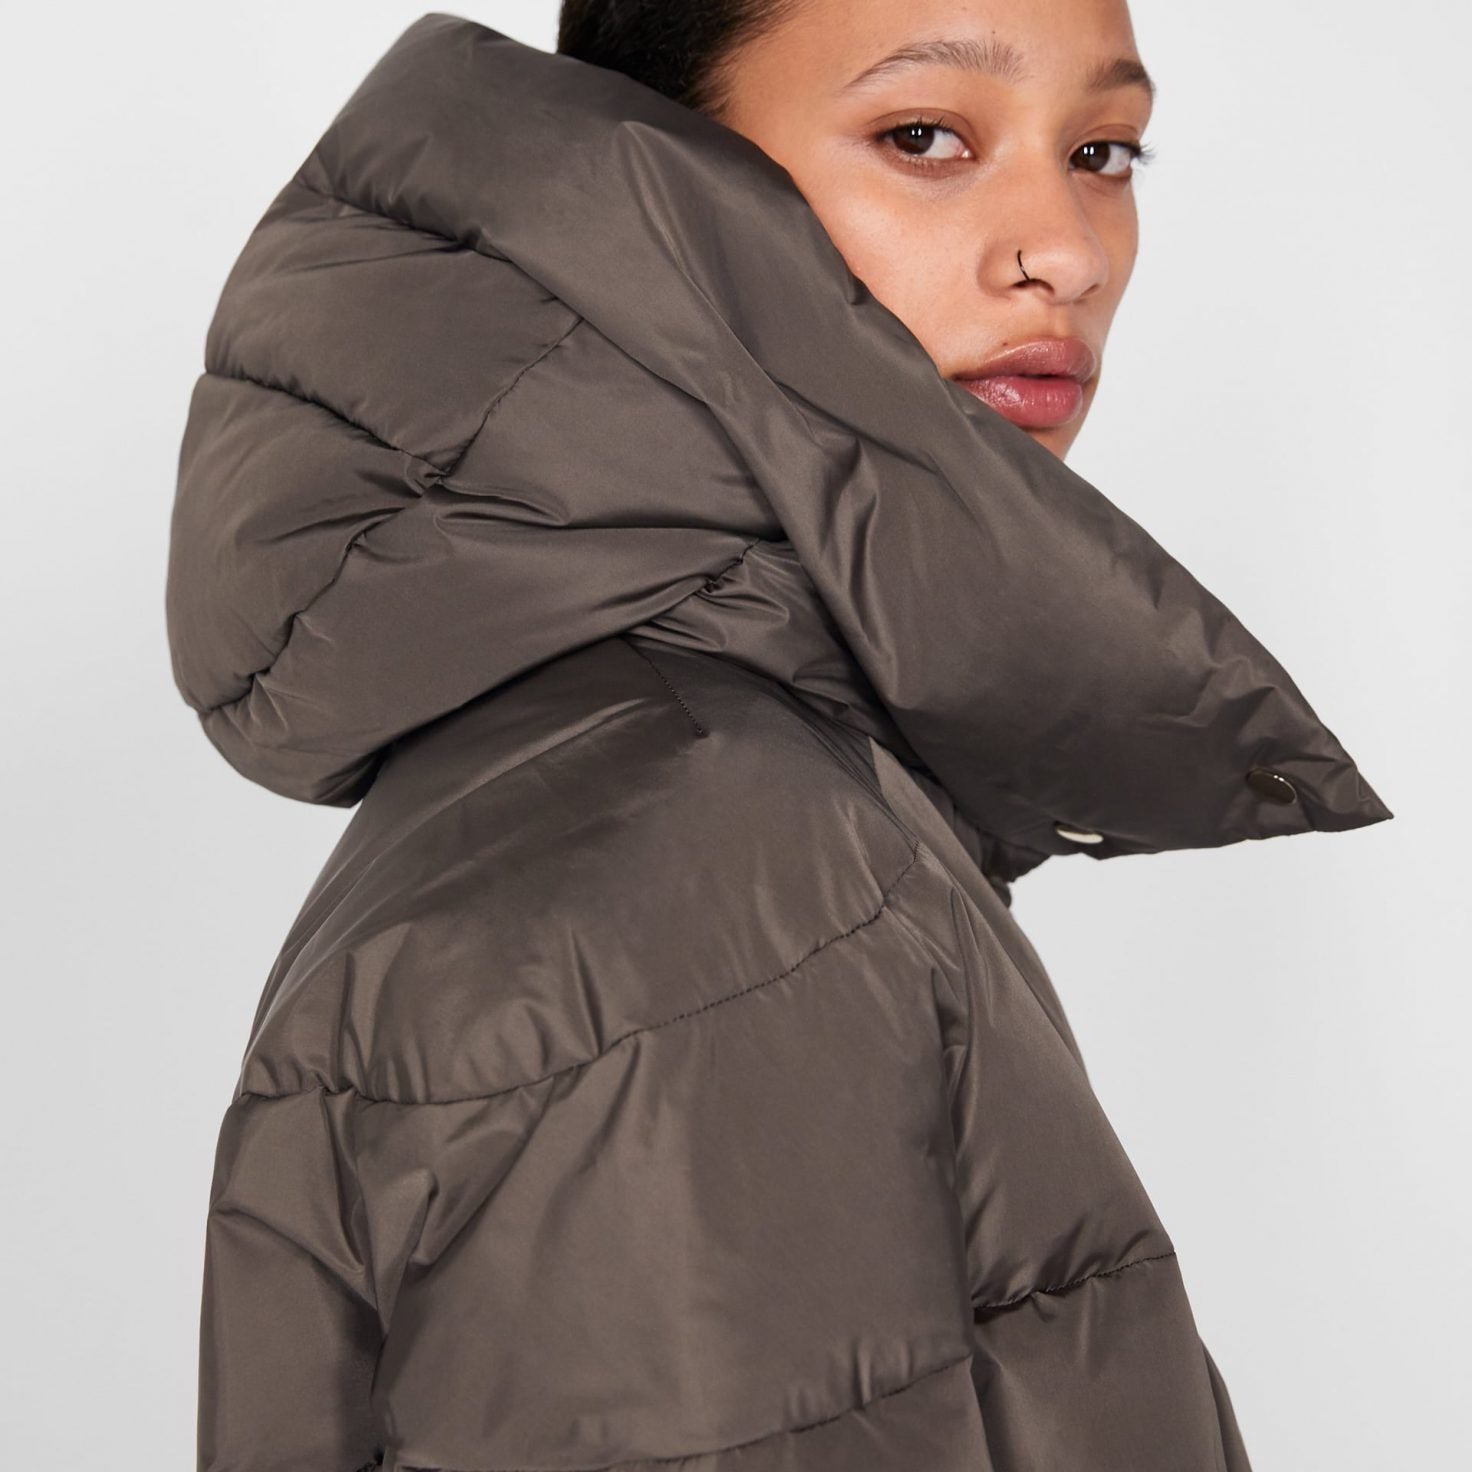 Bundle Up, Sis! It’s Still Cold Outside But Here Are 10 Warm Coats For Under $200